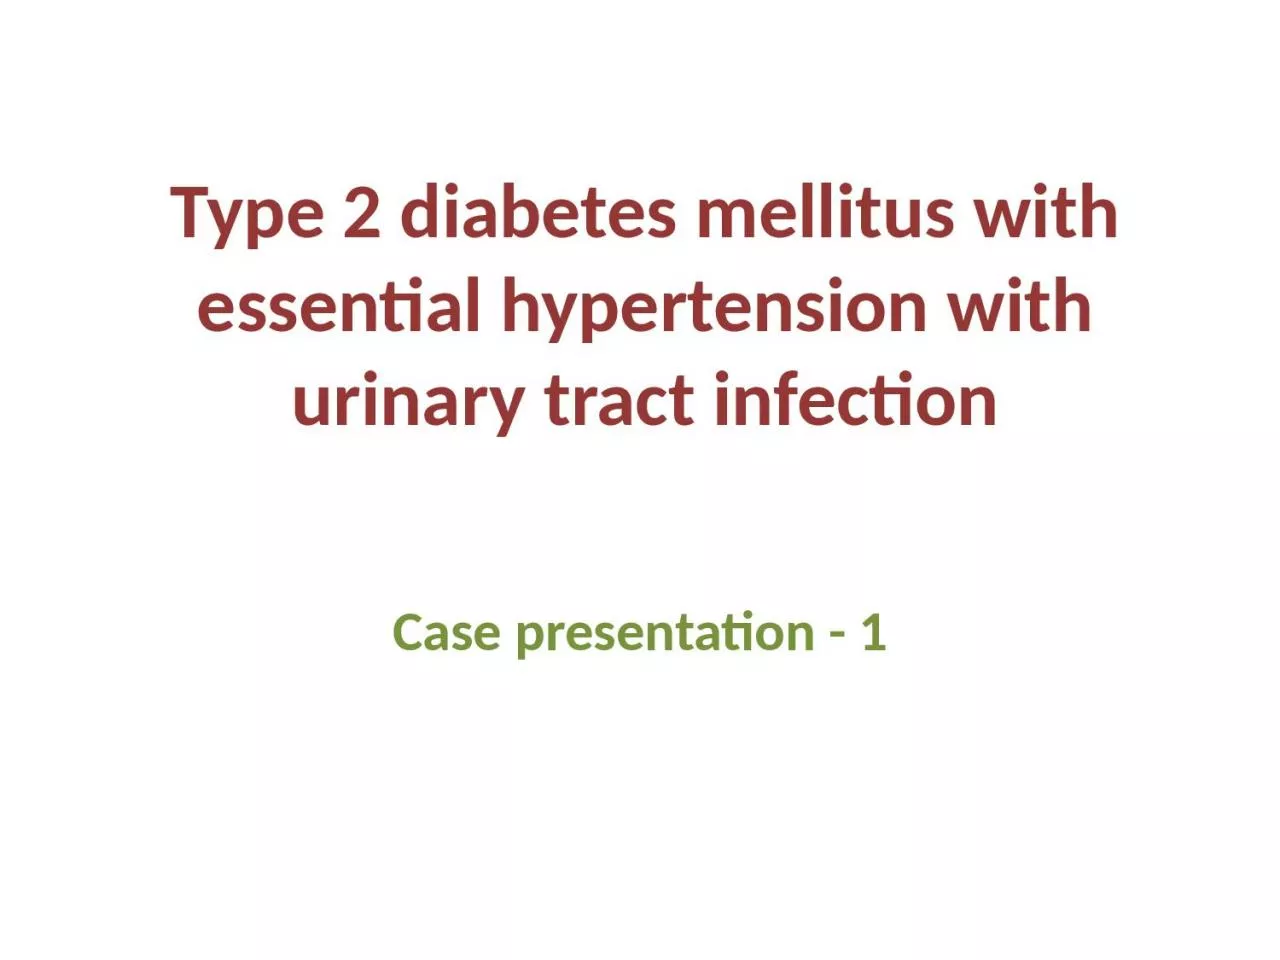 Type 2 diabetes mellitus with essential hypertension with urinary tract infection